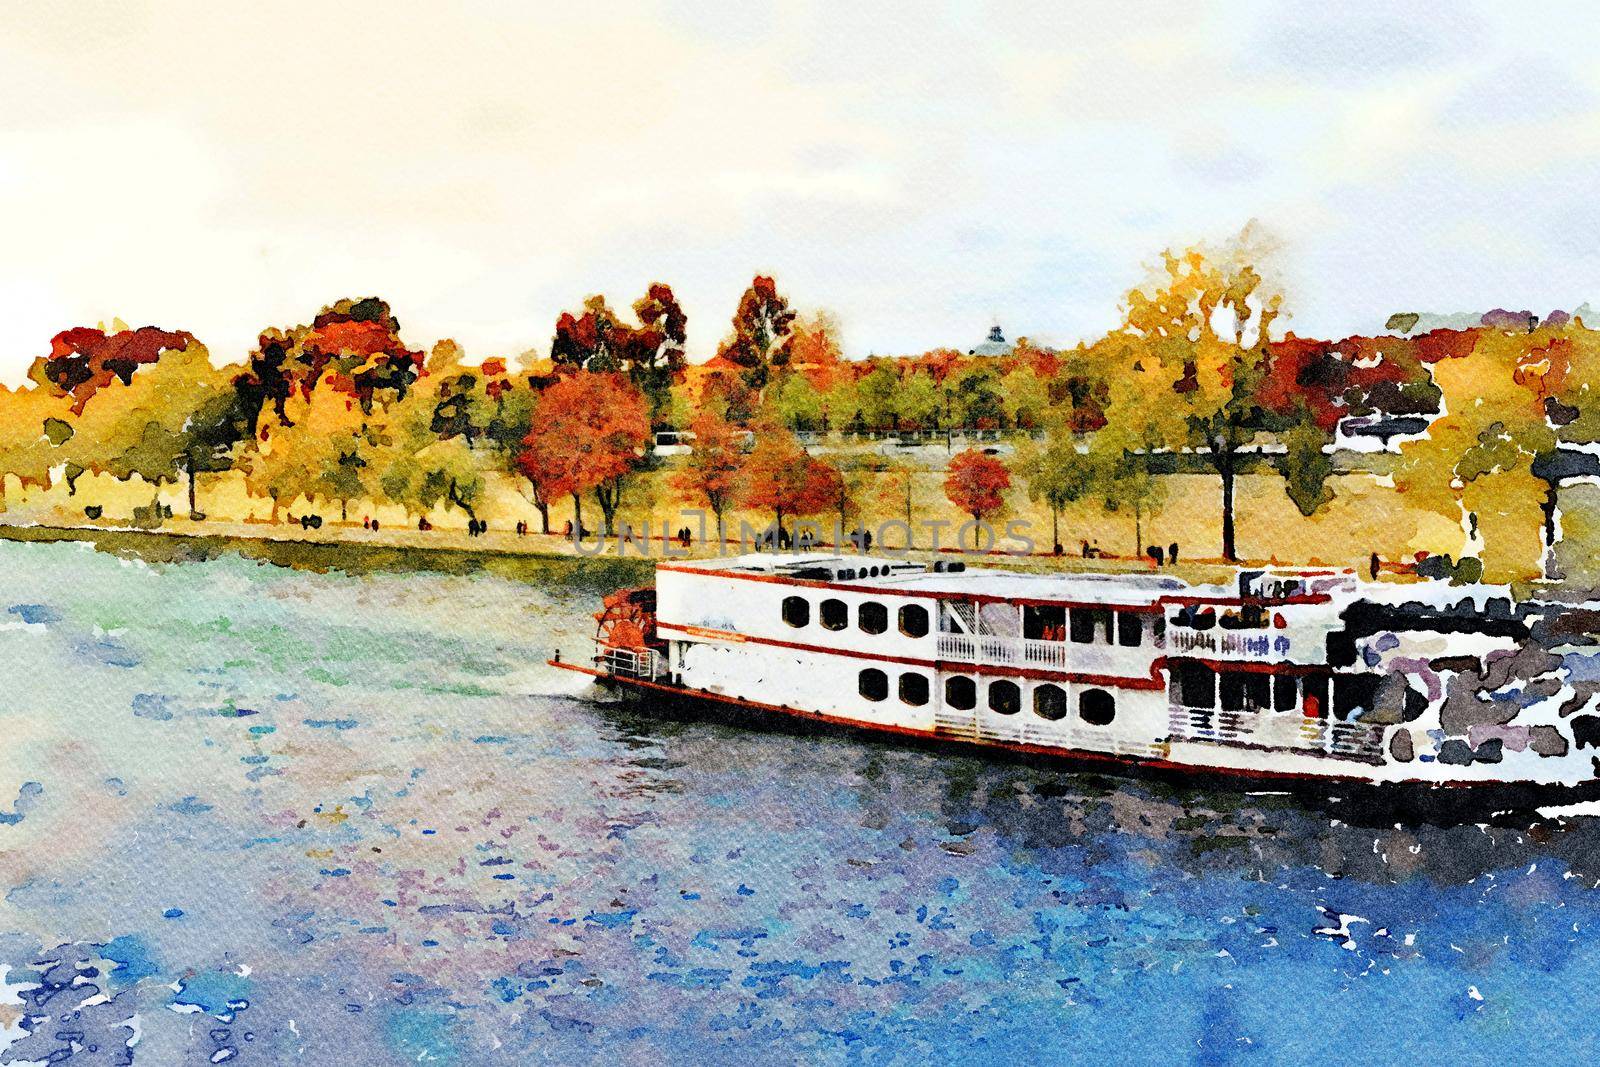 Watercolor representing a steamboat on the Seine in Paris in the autumn